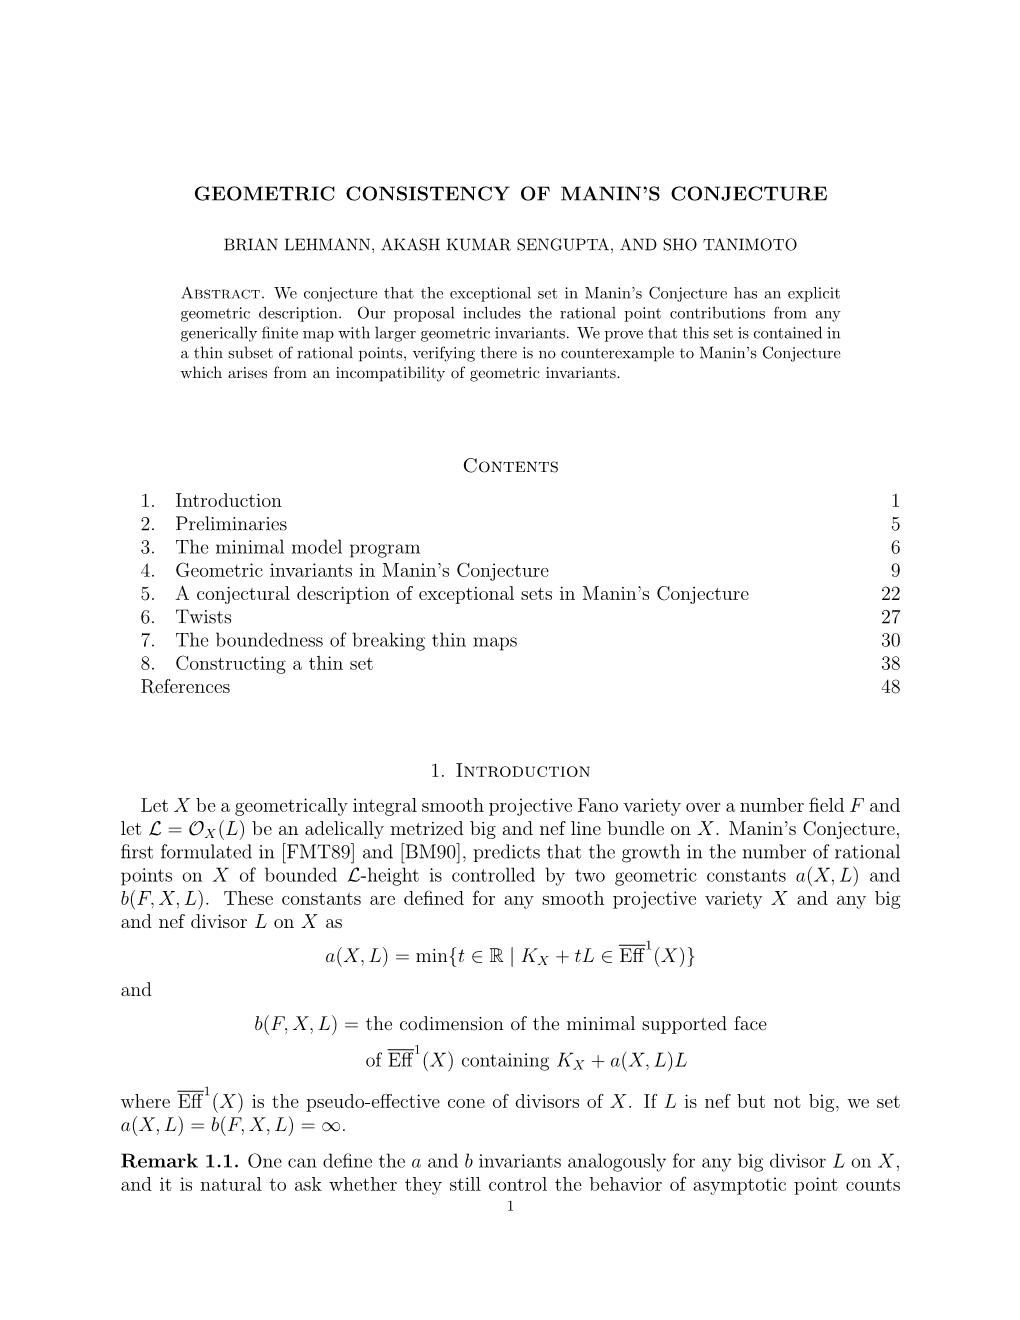 Geometric Consistency of Manin's Conjecture